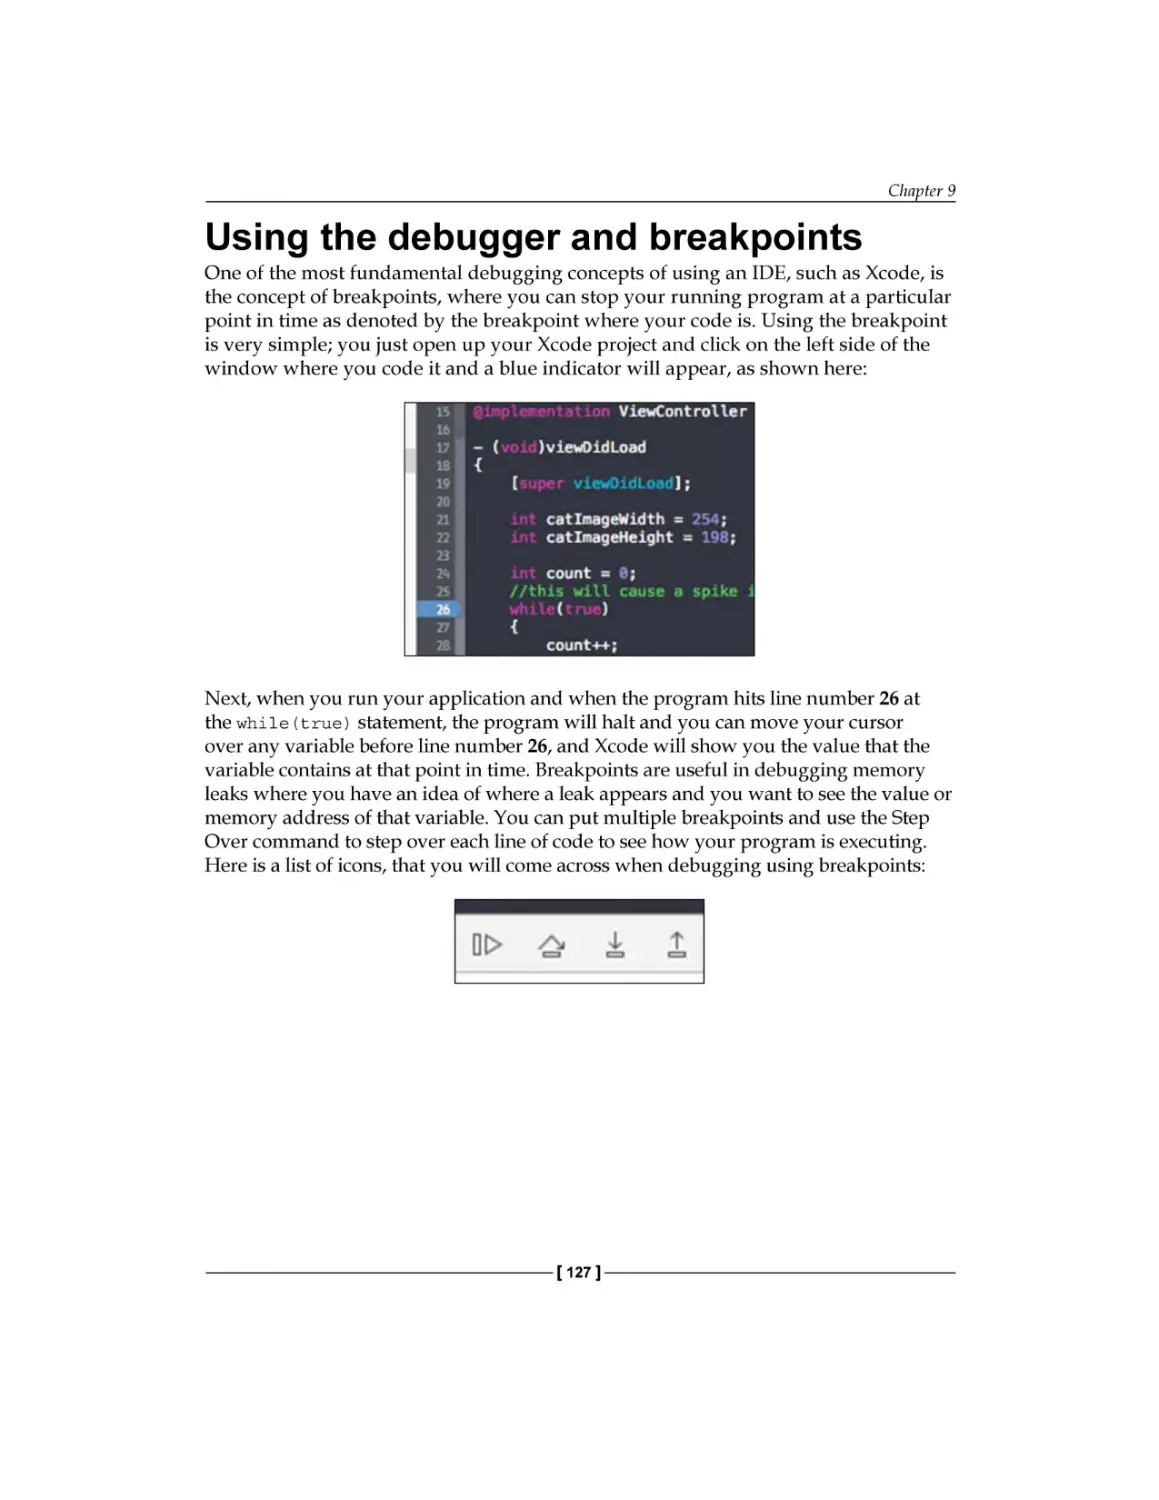 Using the debugger and breakpoints